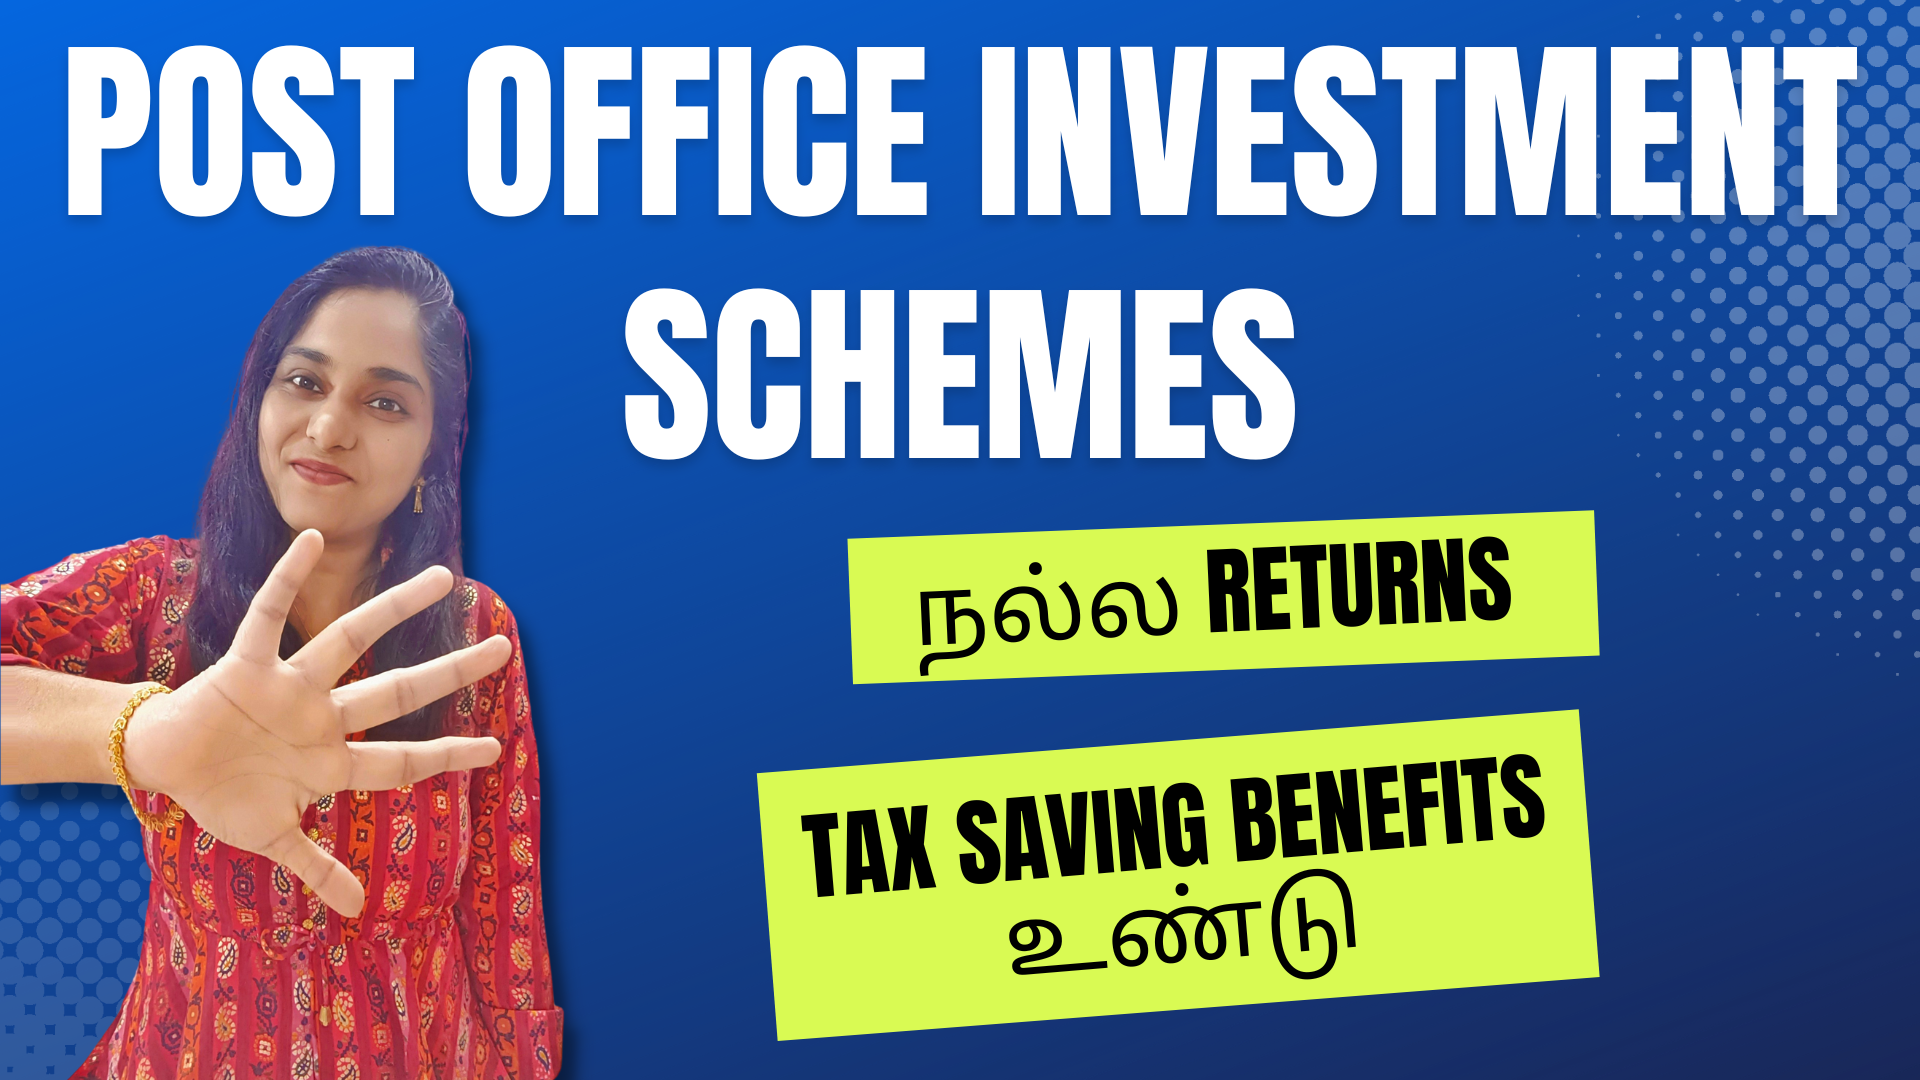 5 Post Office Investment Schemes With Good Returns And Income Tax Benefits